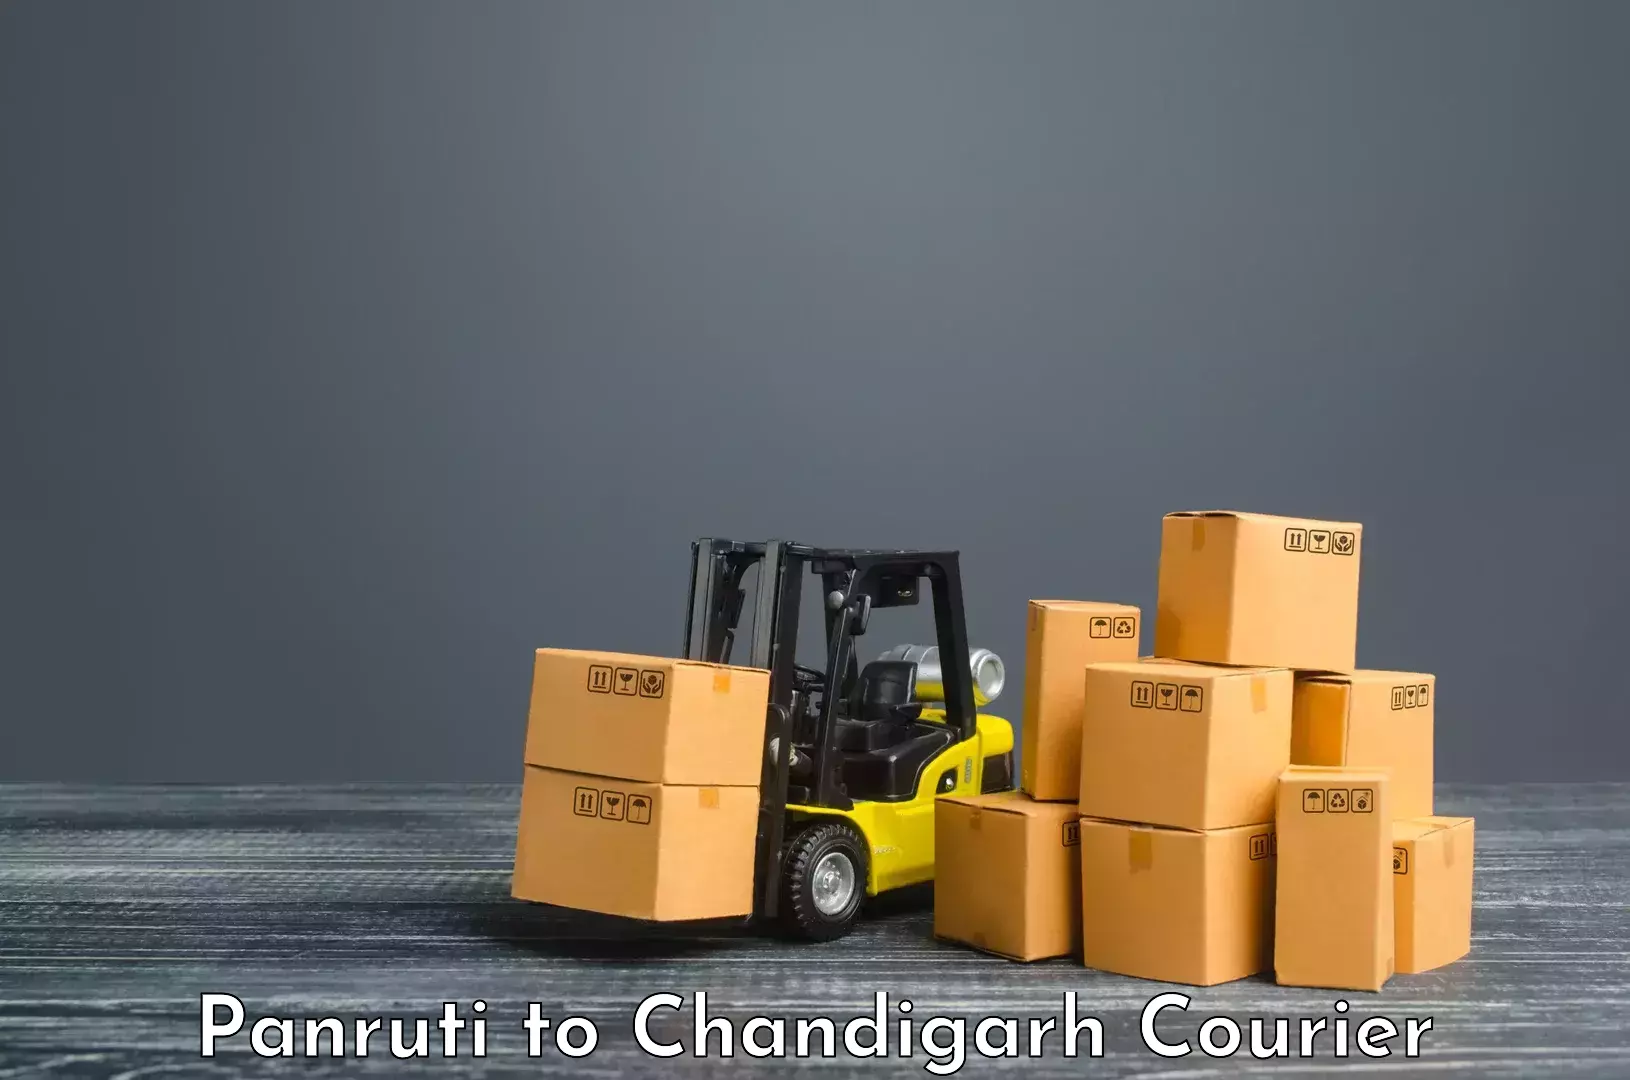 User-friendly courier app Panruti to Chandigarh